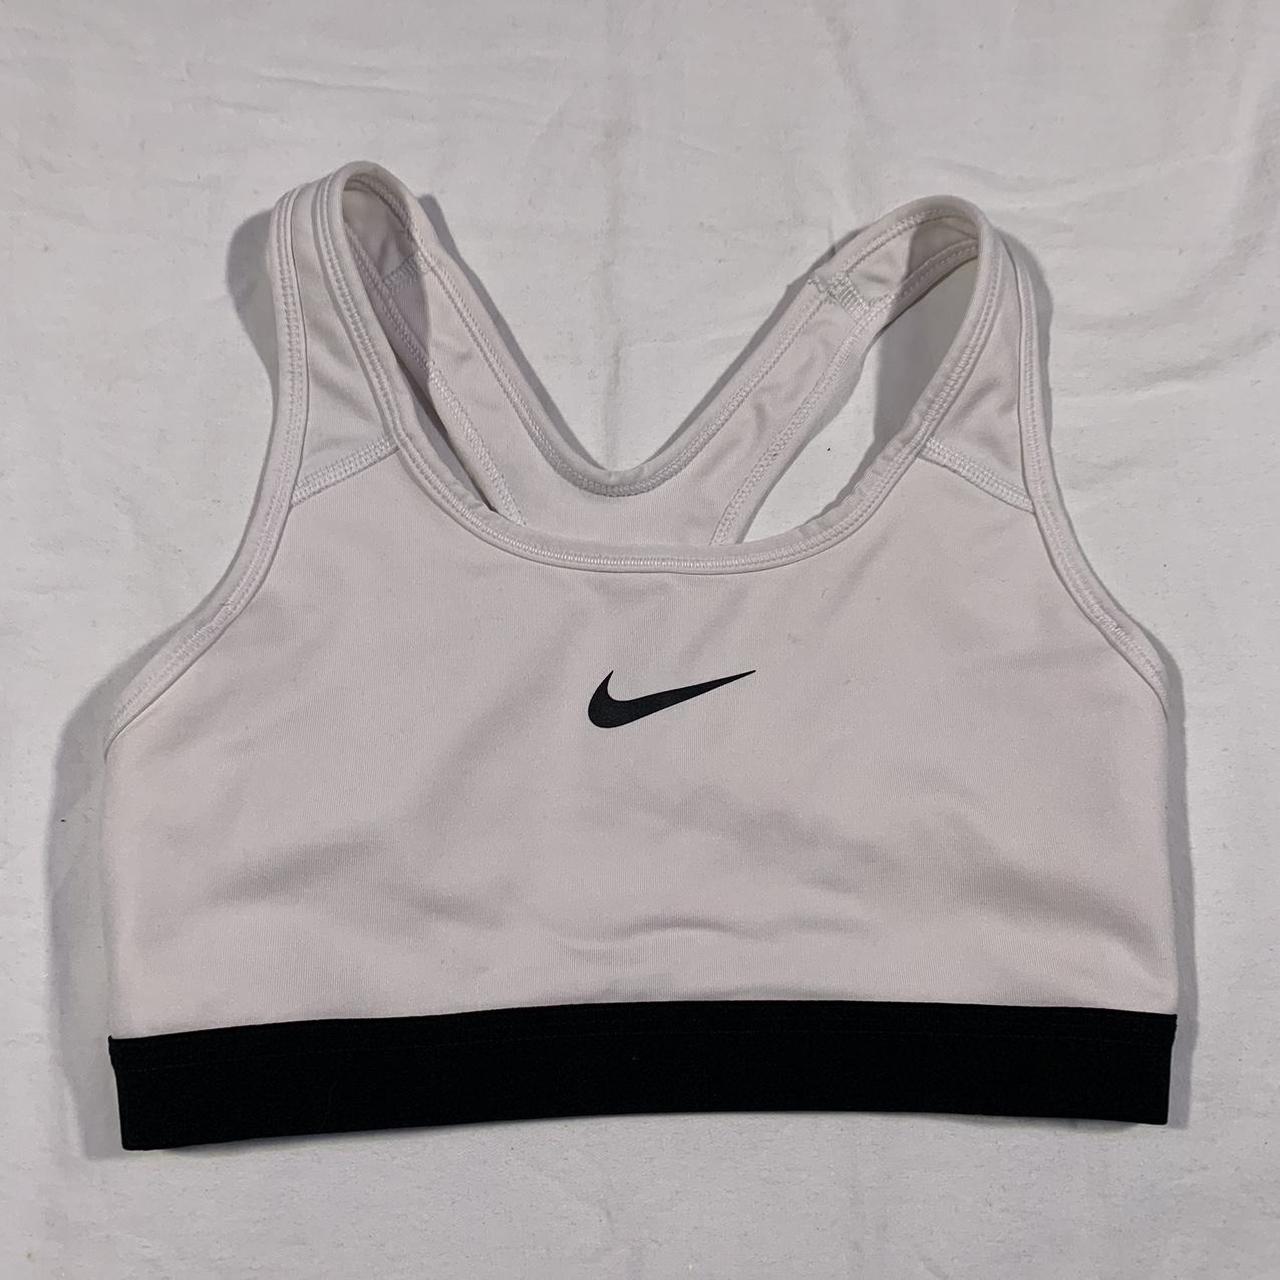 white nike sports bra tag size small 13-16 inches - Depop